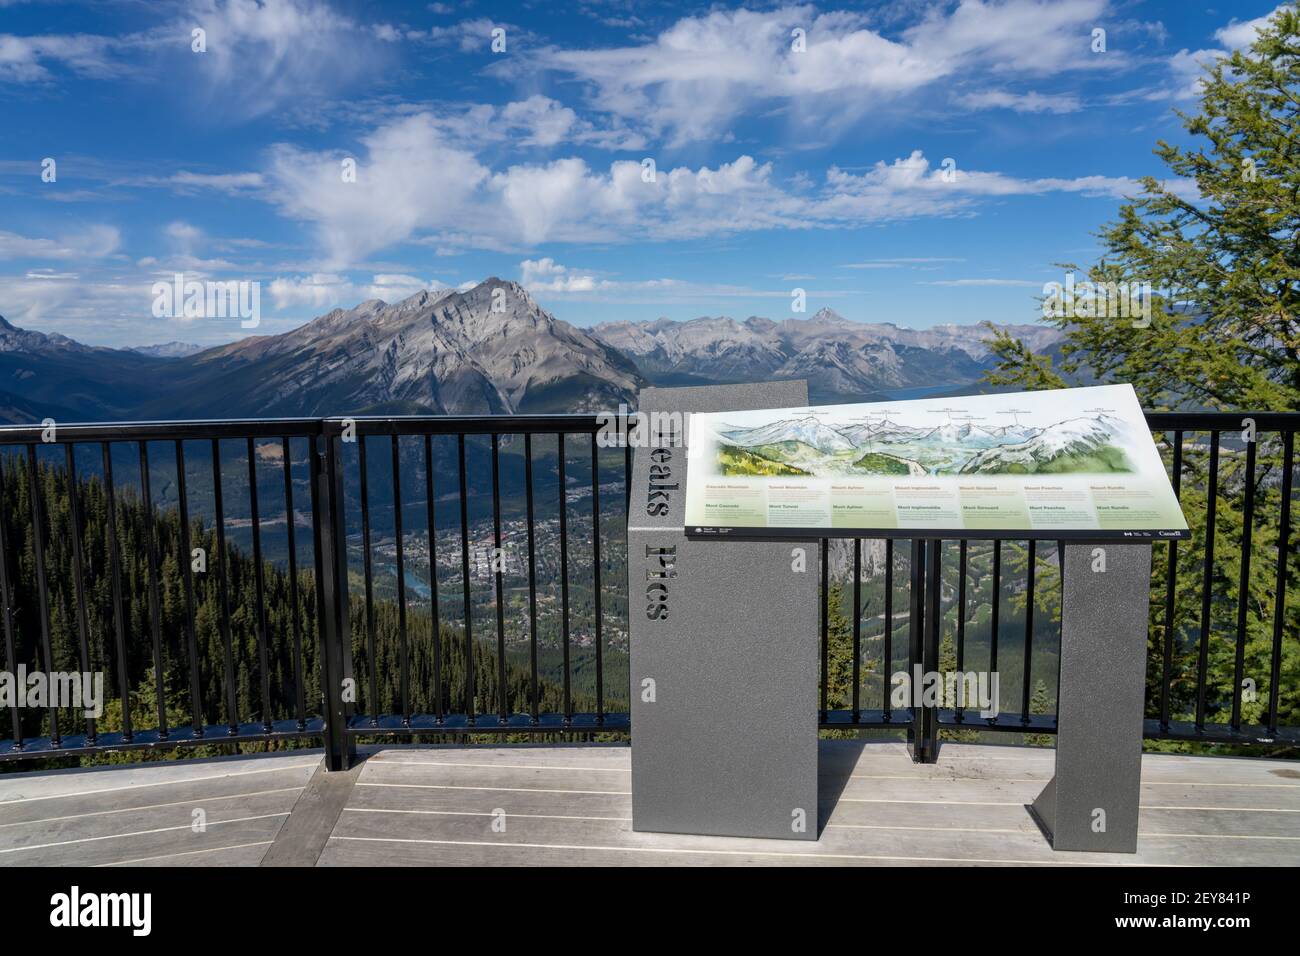 Sulphur Mountain trail in summer, wooden stairs and boardwalks along the summit. Banff National Park, Canadian Rockies, Alberta, Canada. Stock Photo